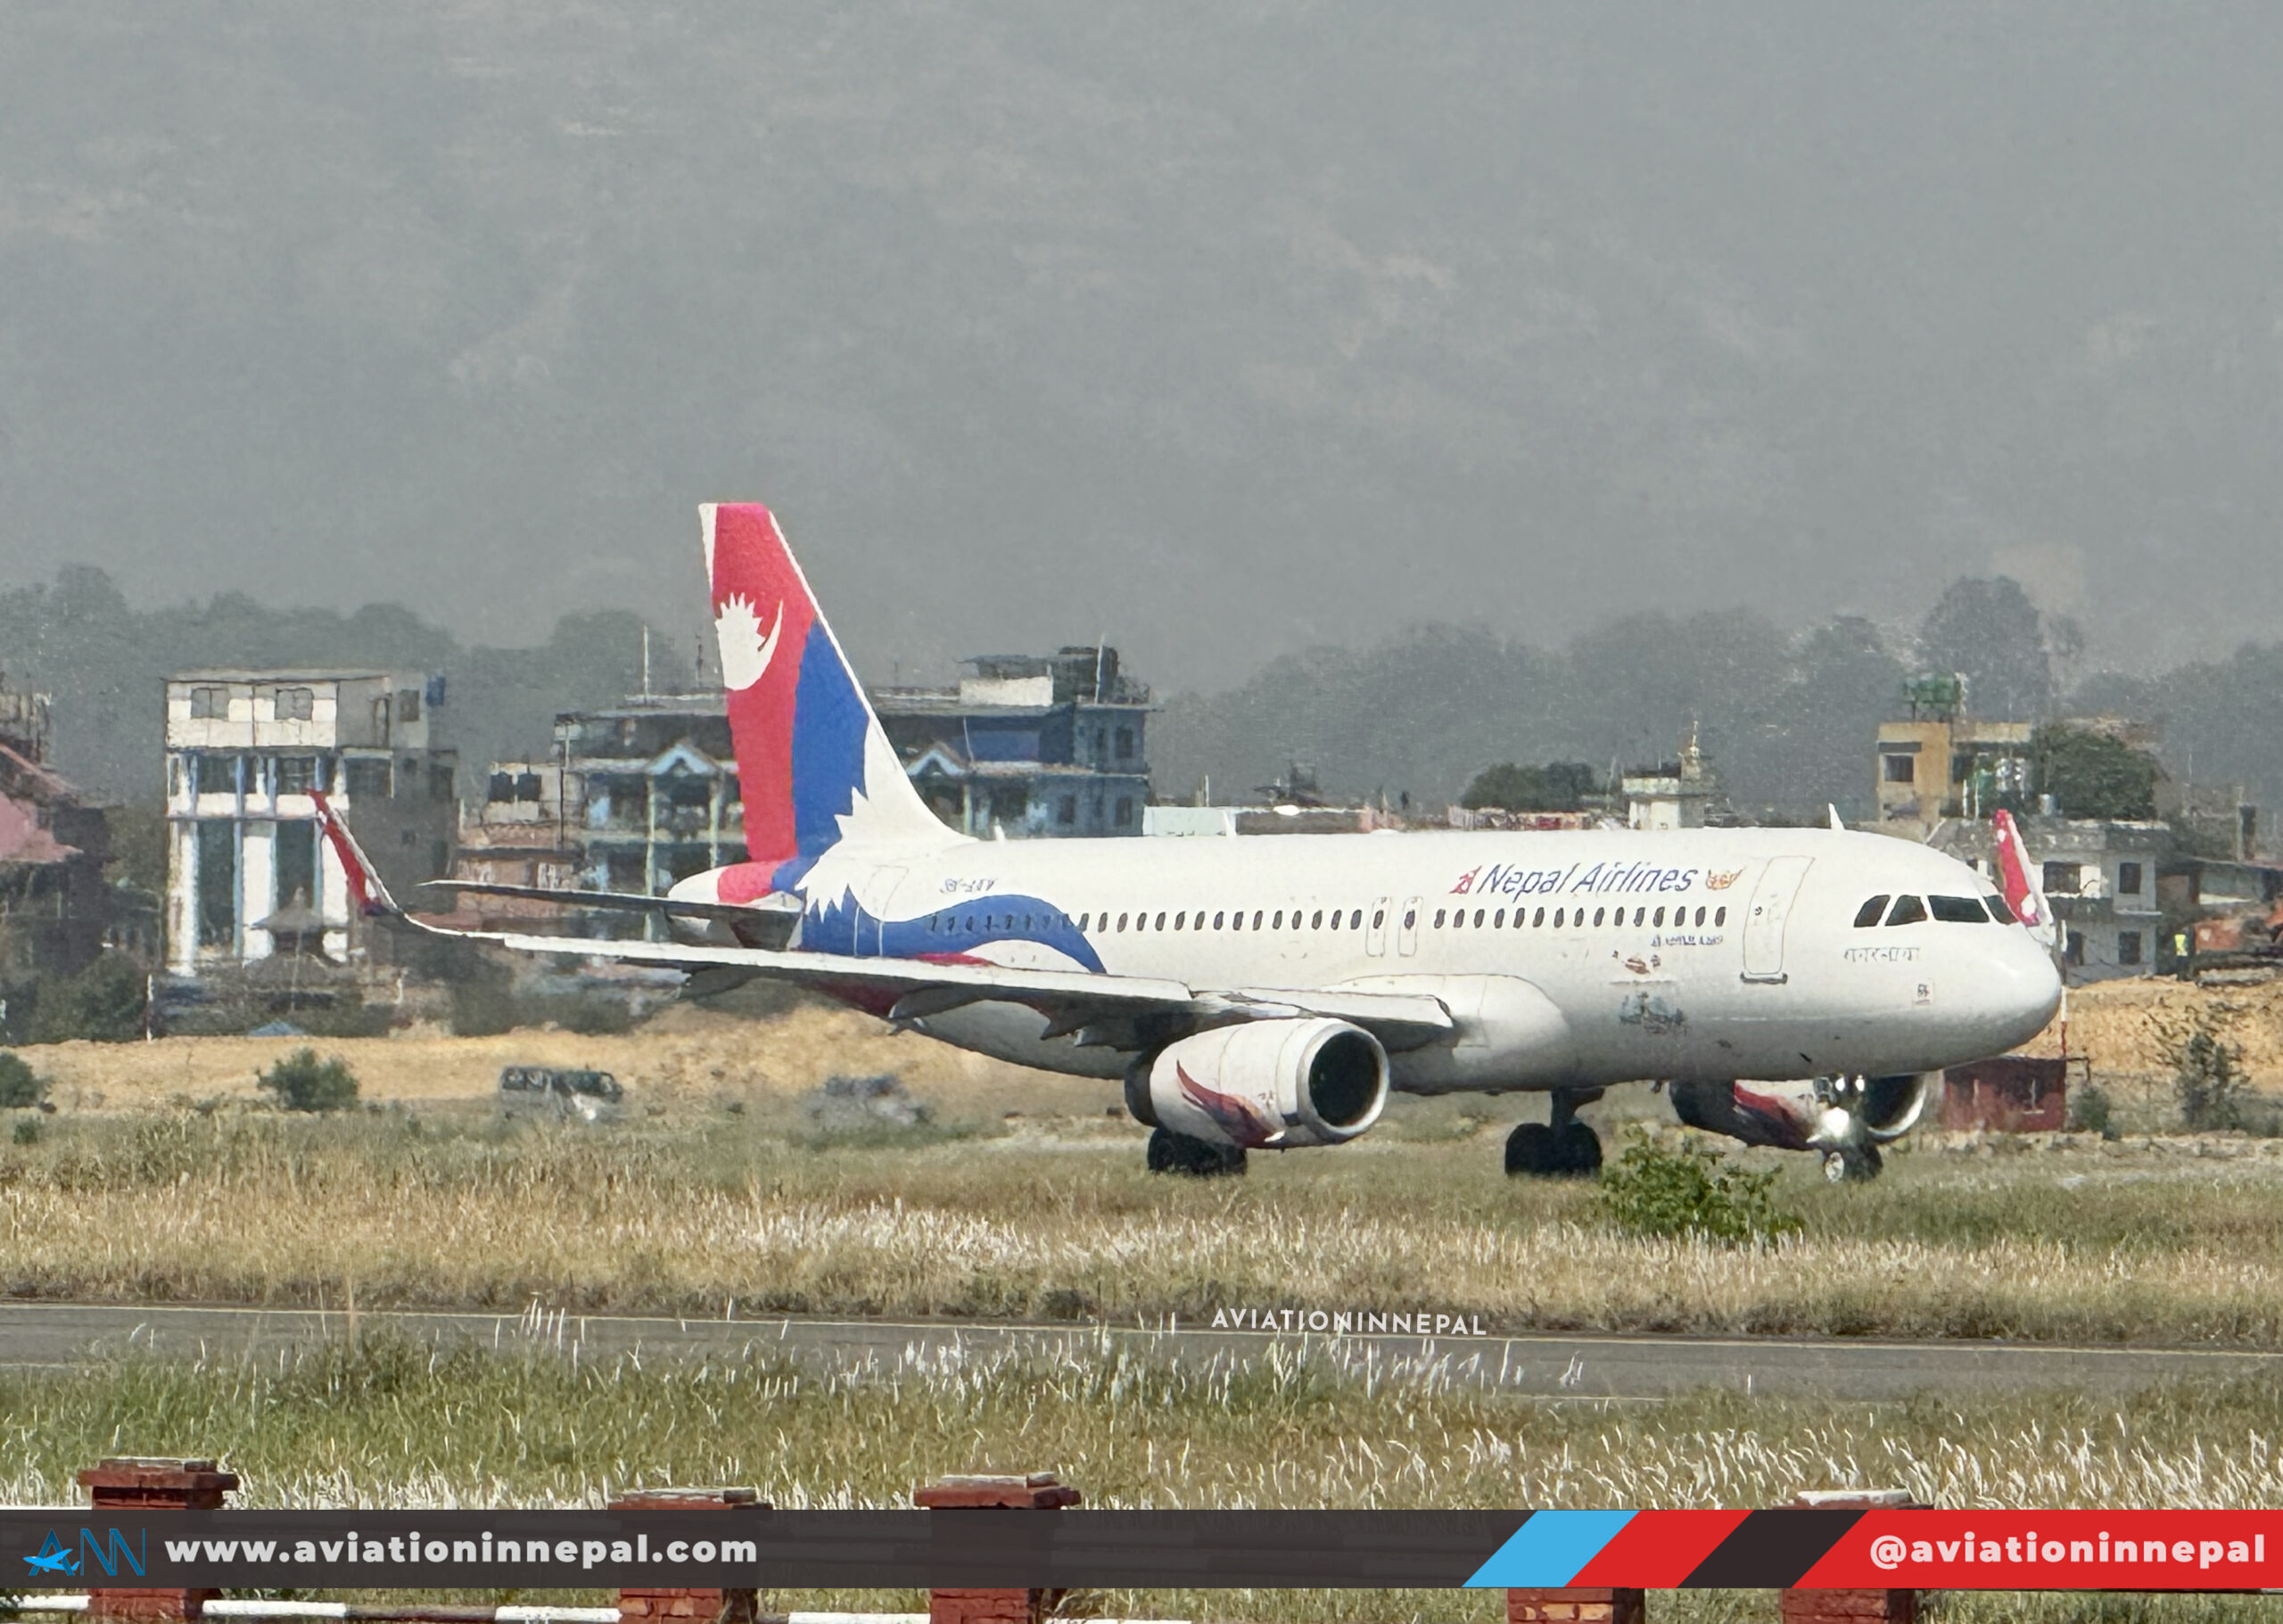 Nepal Airlines Airbus A320 in TIA - Aviation in Nepal (Copyright)